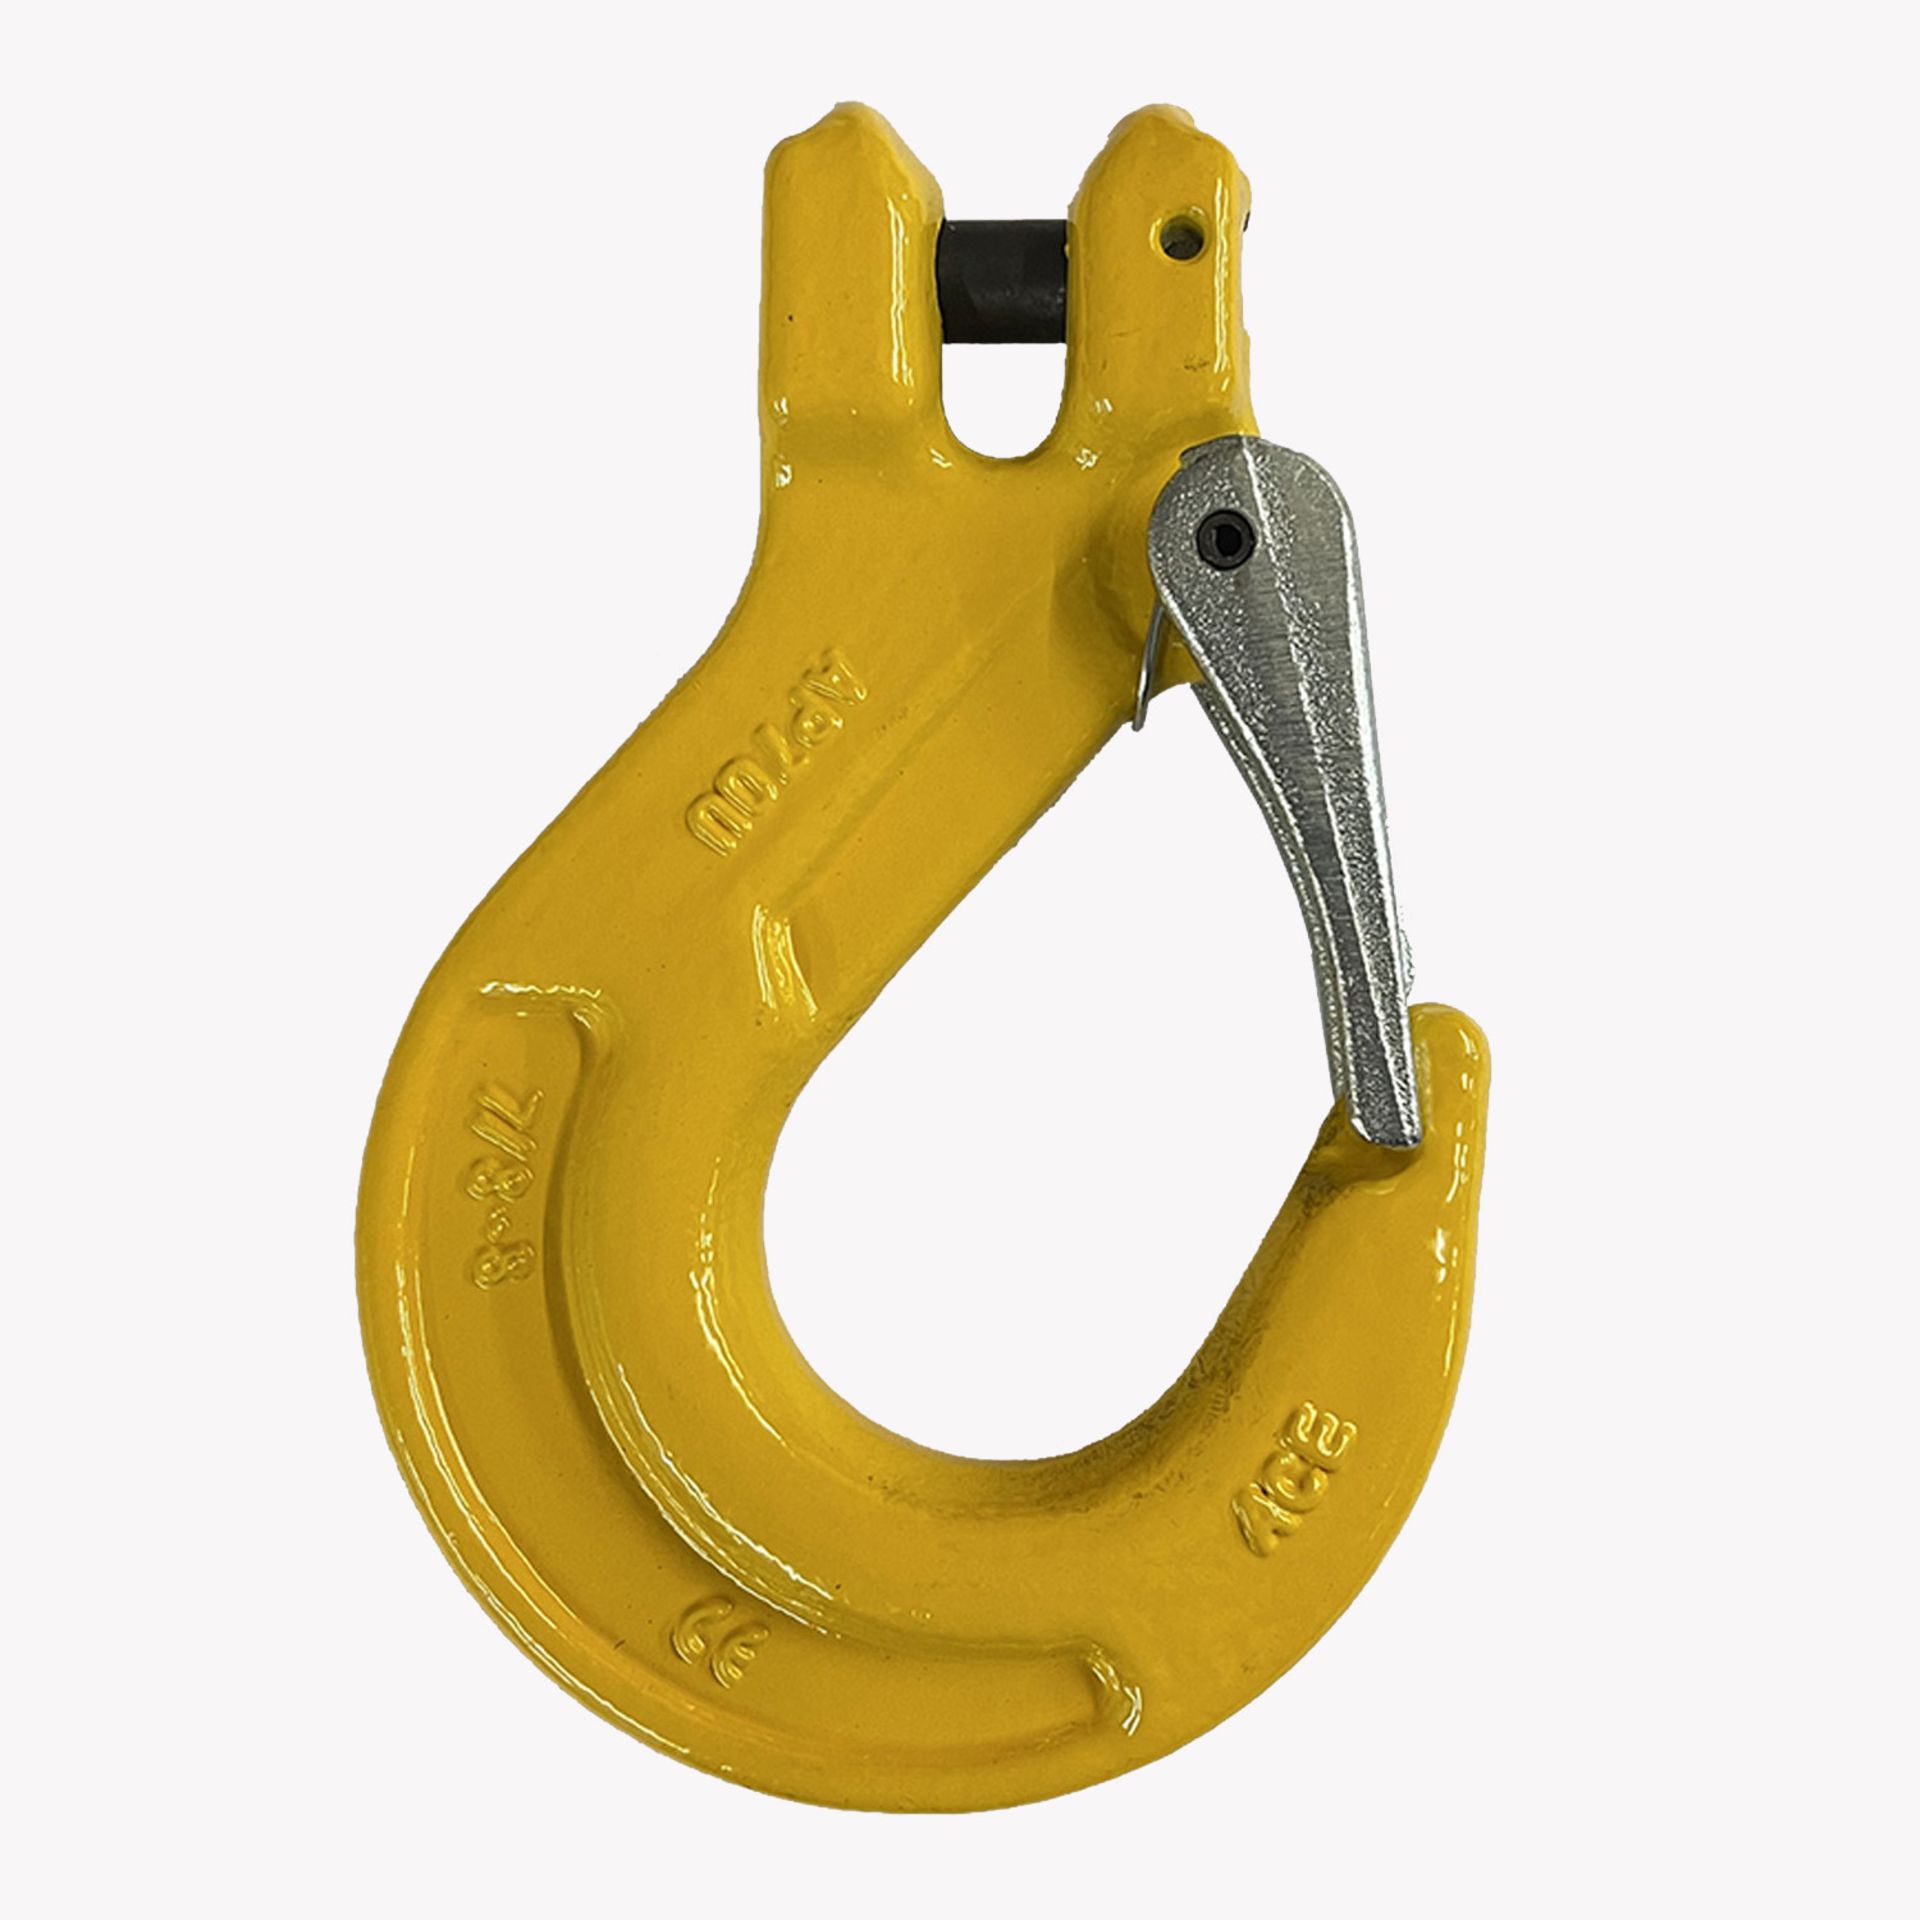 4 X 7mm Grade 8 Clevis Sling Hook With Safety Catch (Yascsh07)